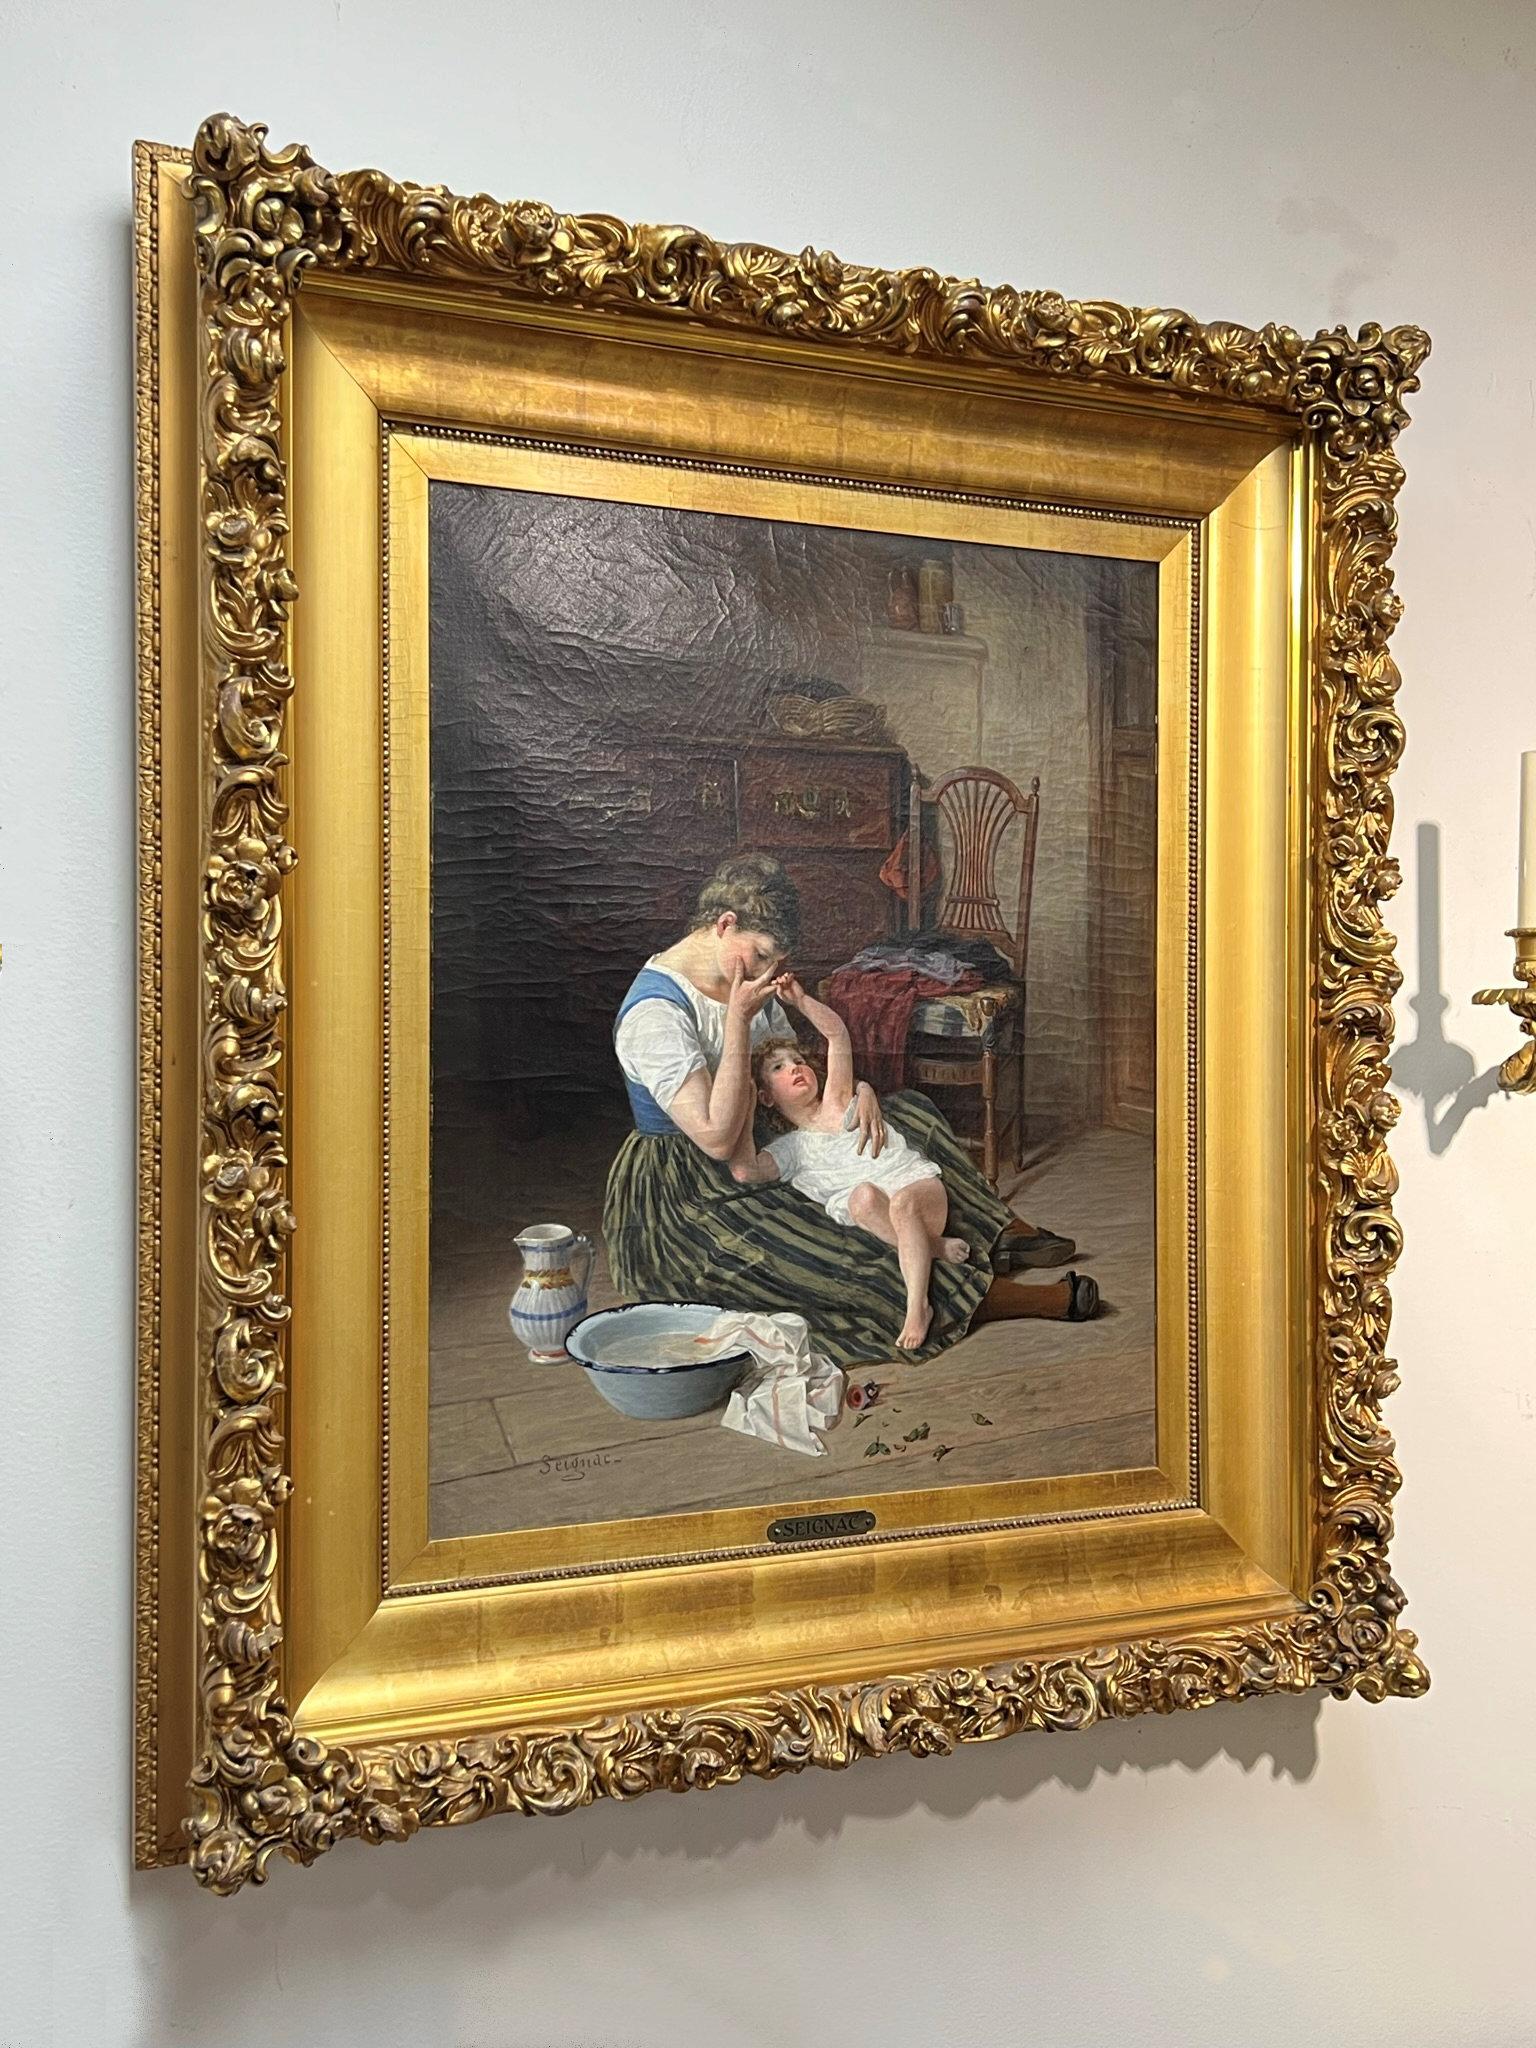 This lovely scene of a mother and child by Paul Seignac (1826-1904) is painted on canvas stretcher measuring 21 1/4 by 25 1/2 inches and mounted in a period giltwood frame measuring 34 1/2 by 38 1/2 inches. Signed in lower left. Rear has the